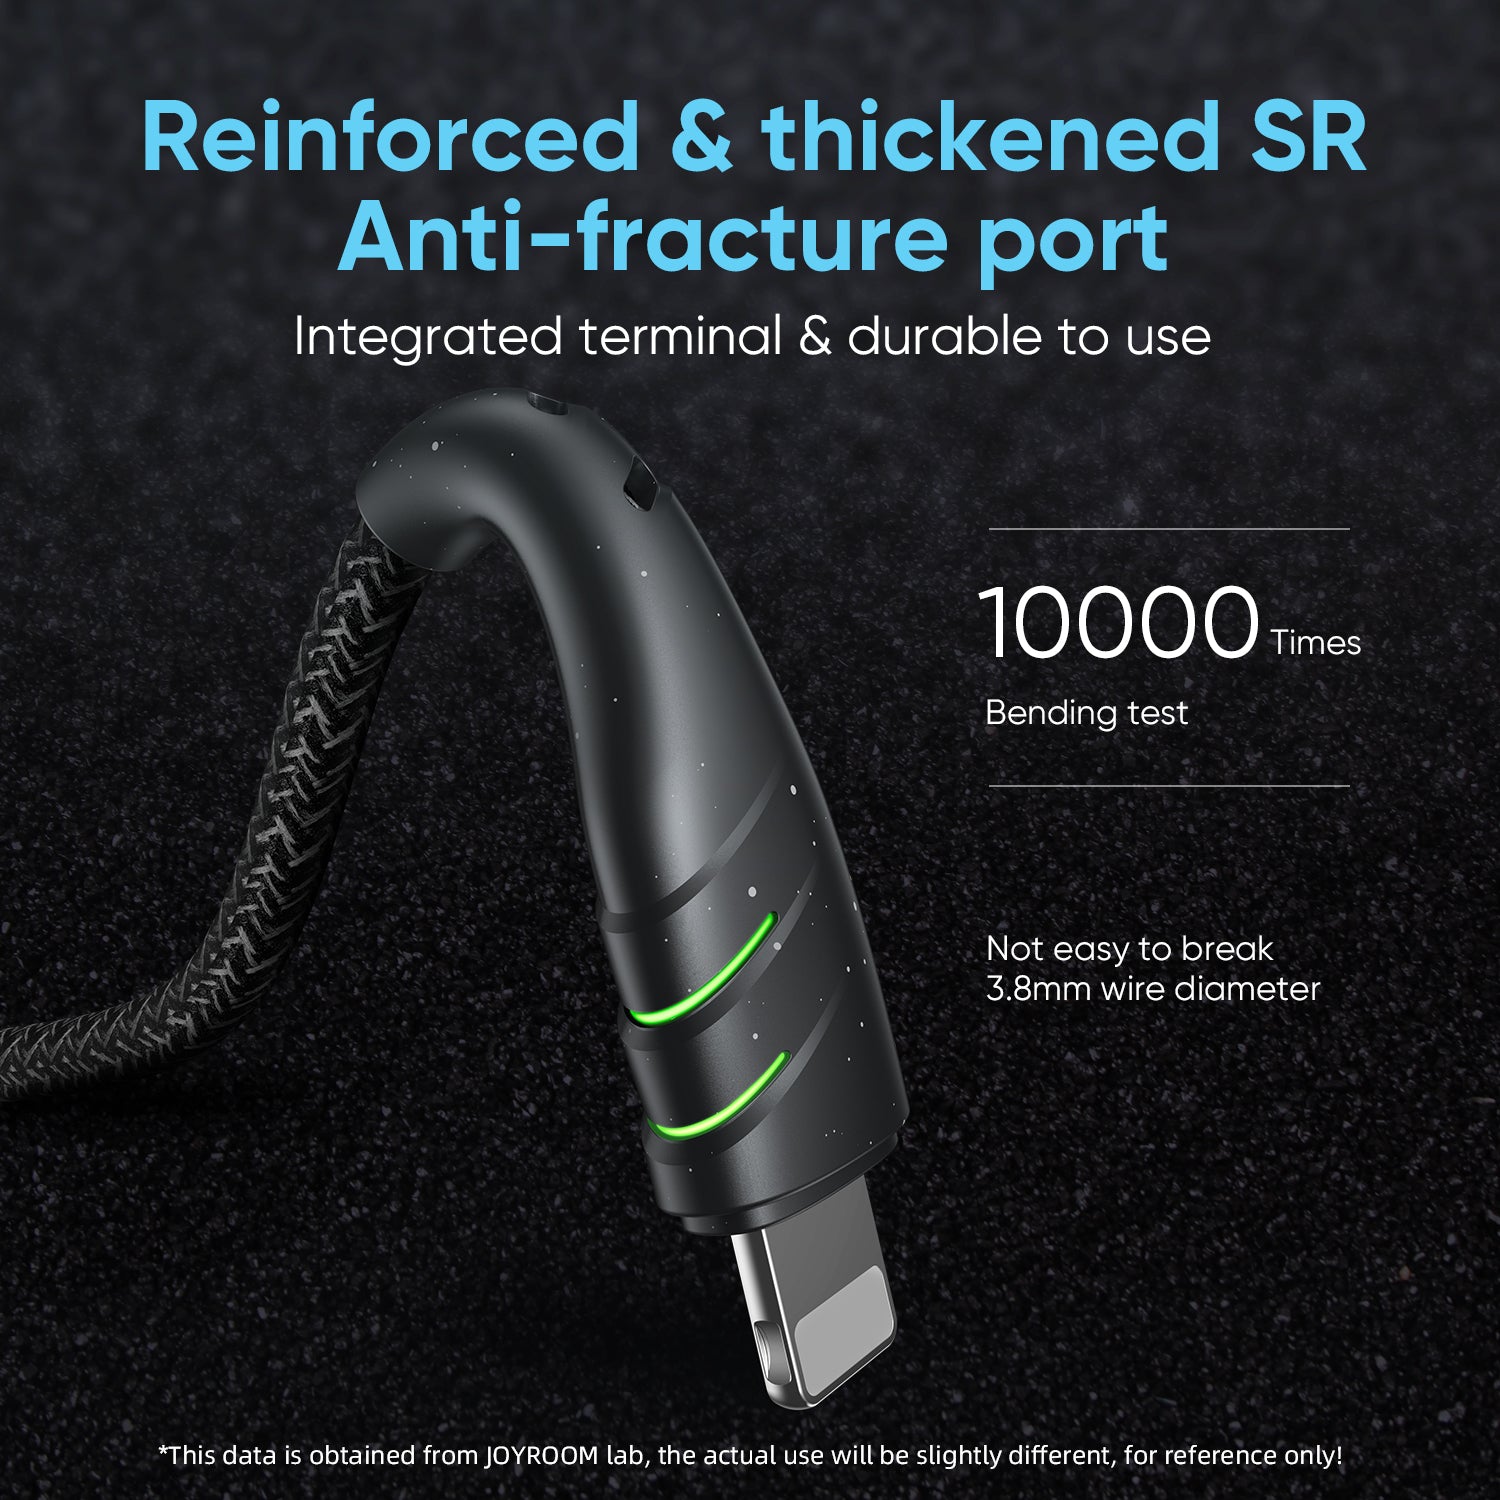 Reinforced & thickened SR